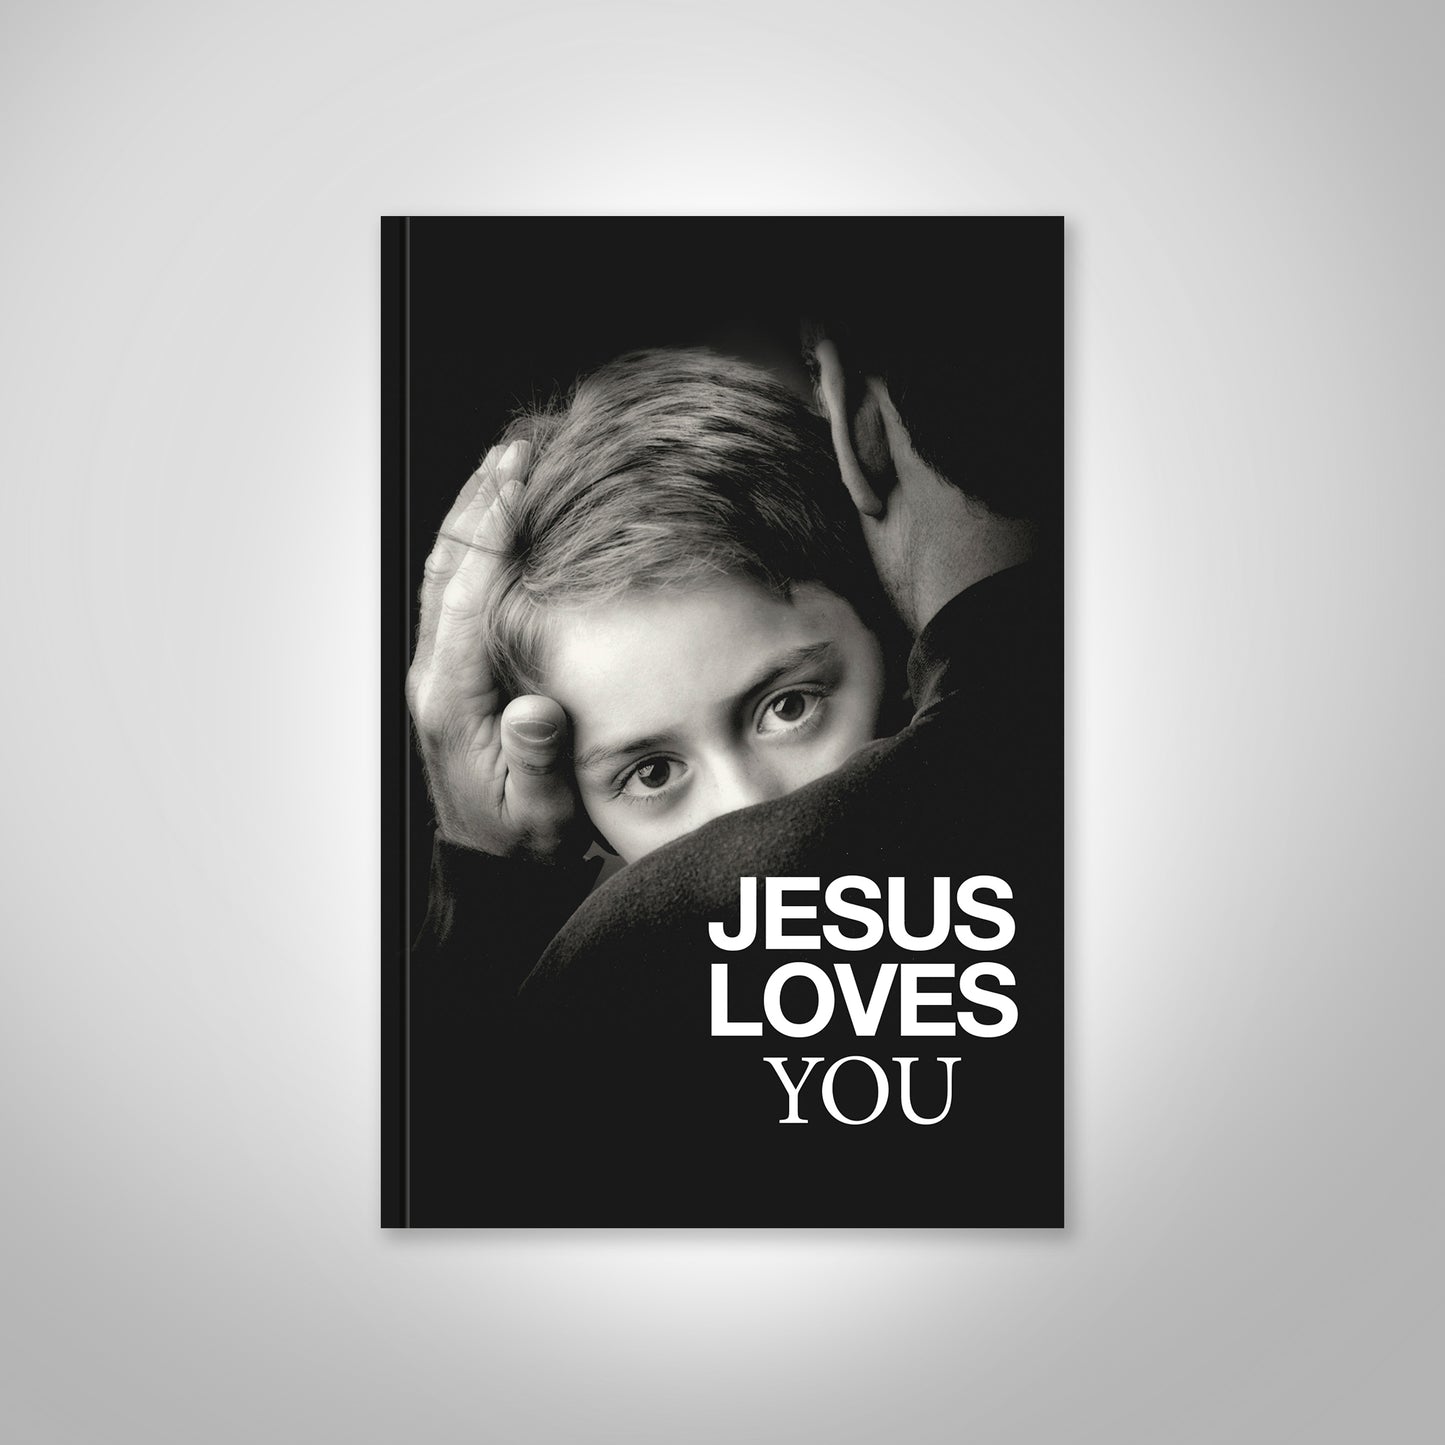 Jesus Loves You Front Book Cover by Matthew M. Price